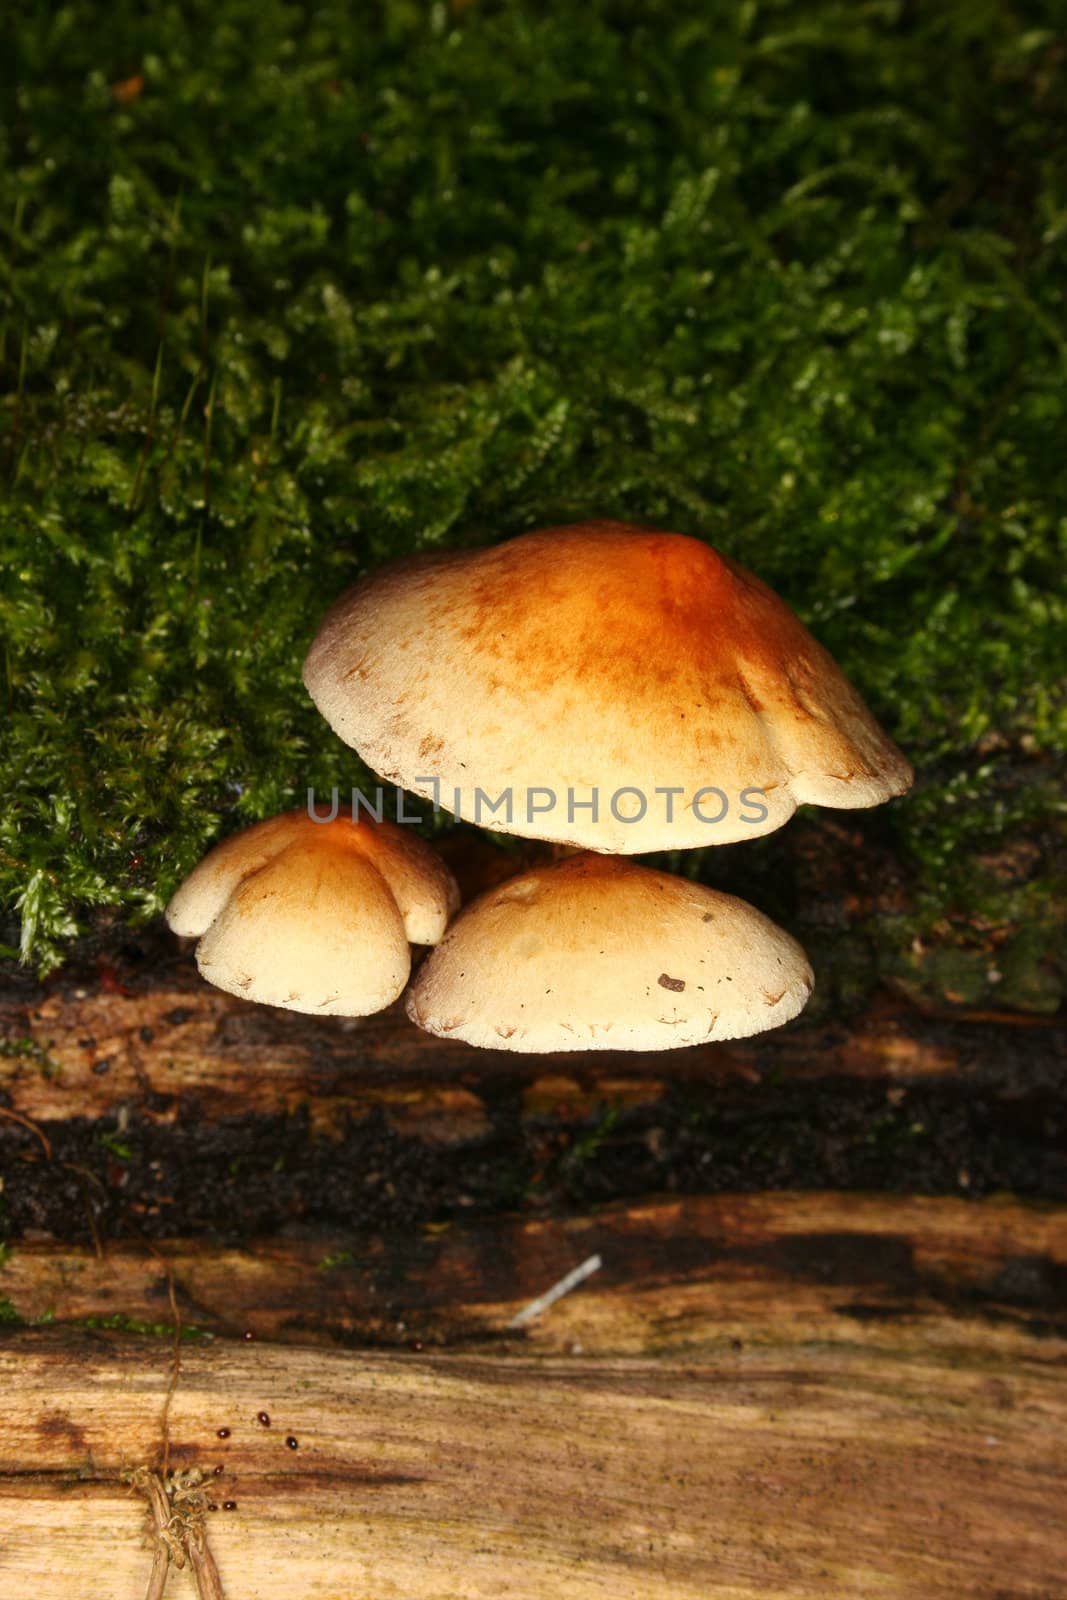 Sulphur Tuft (Hypholoma fasciculare) by tdietrich